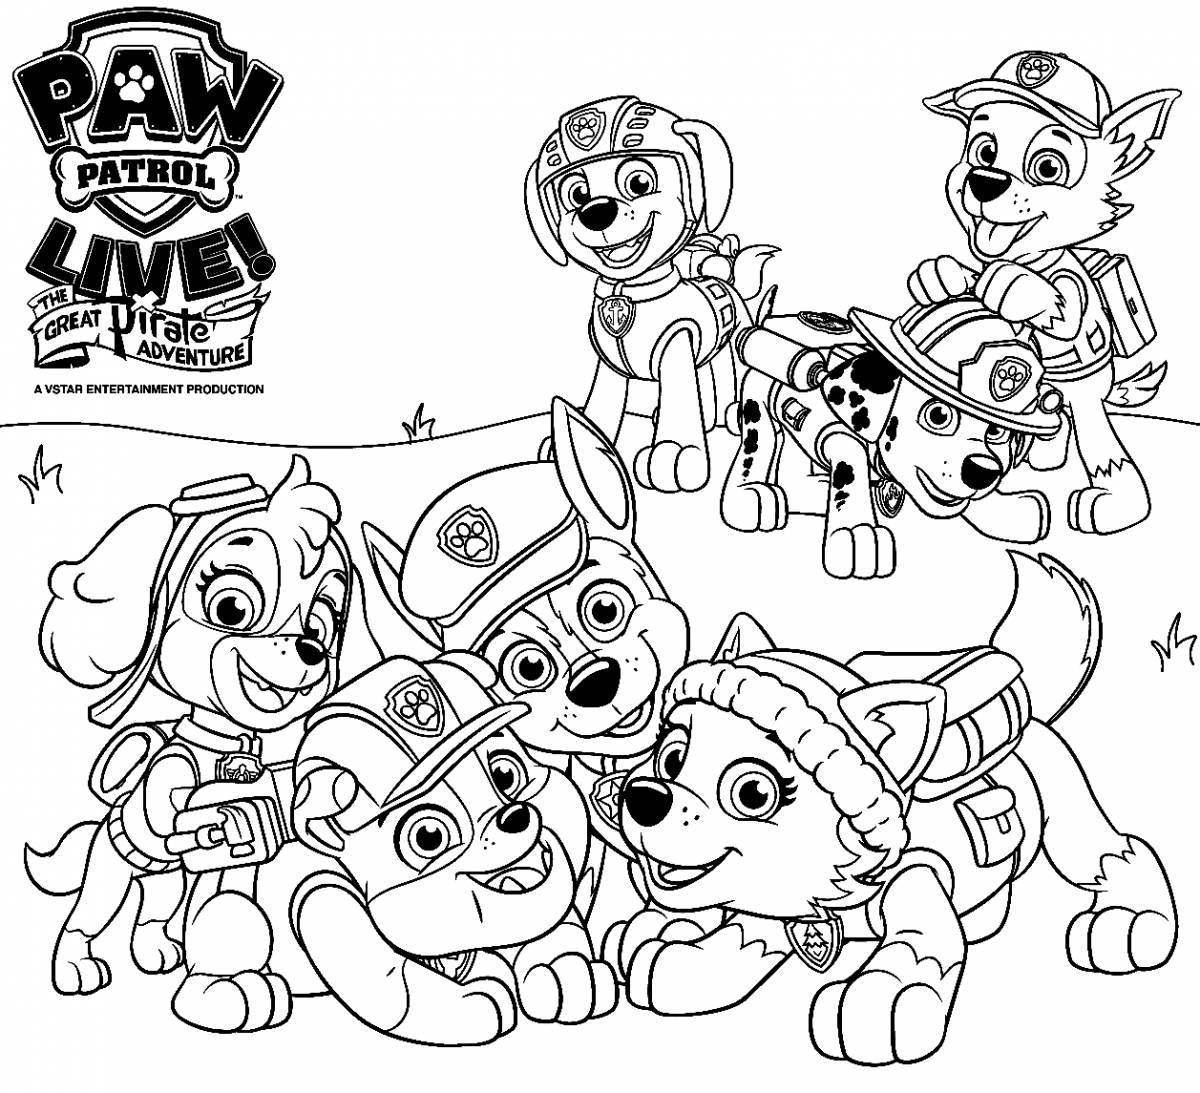 Colorful Paw Patrol Coloring Page for 5-6 year olds